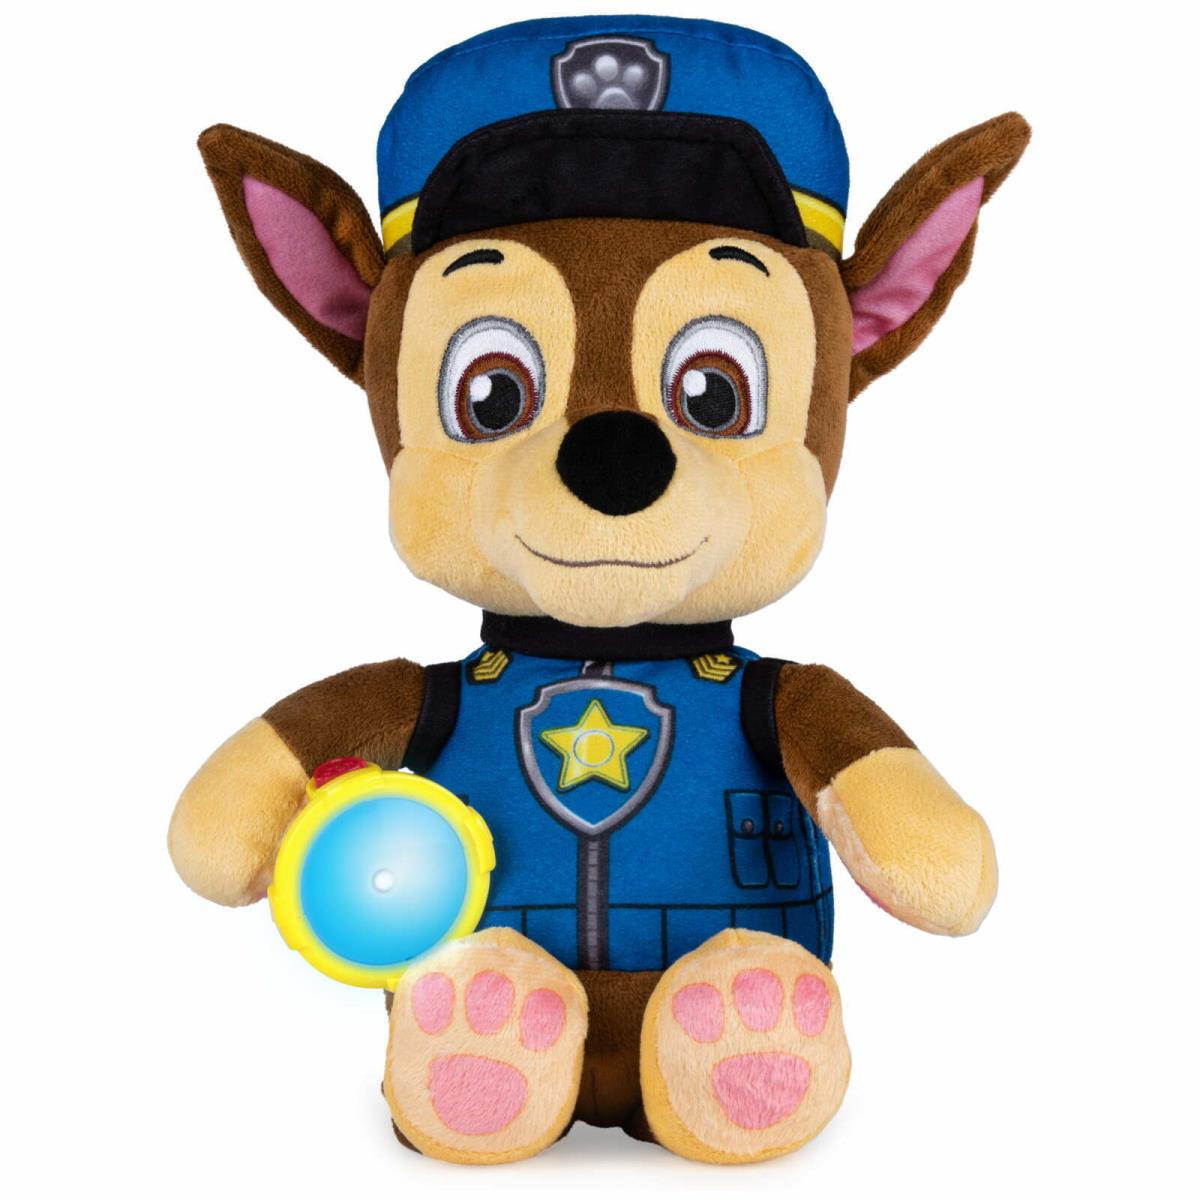 Paw Patrol Snuggle Up Chase Plush with Flashlight and Sounds Stuffed Animal Toy